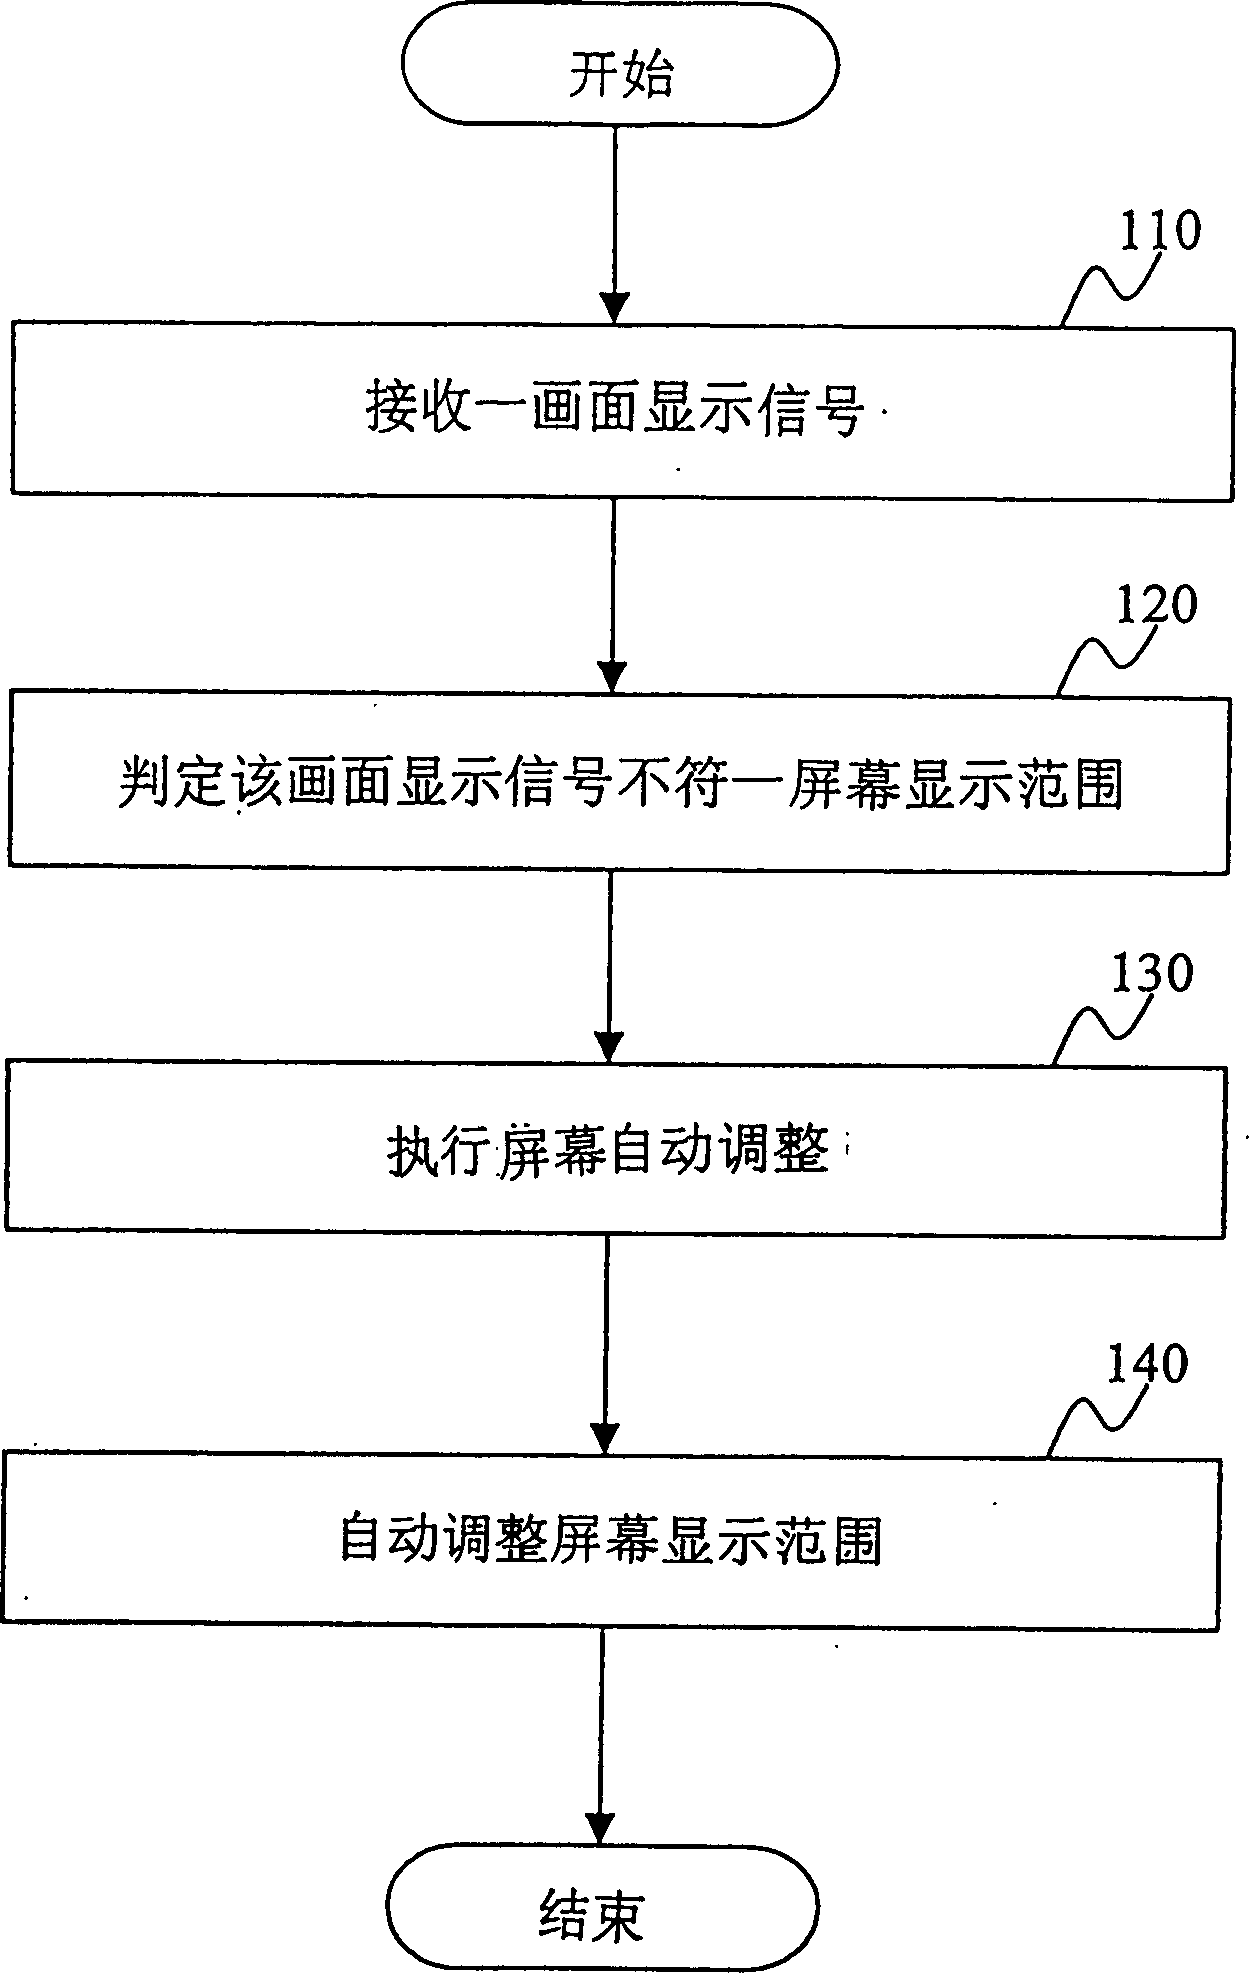 Method for automatically-regulating screen display